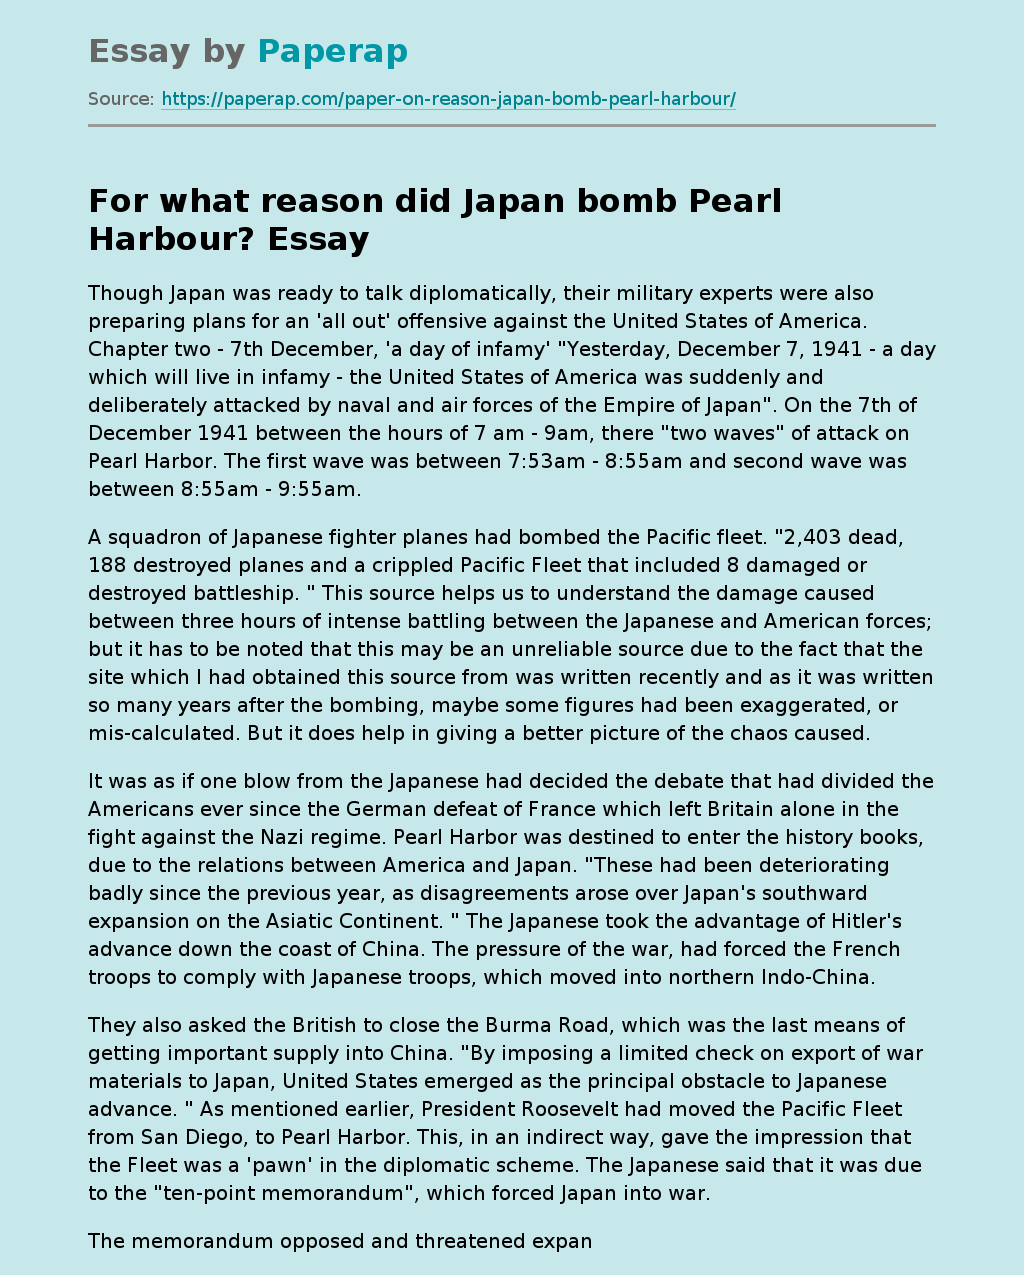 For what reason did Japan bomb Pearl Harbour?